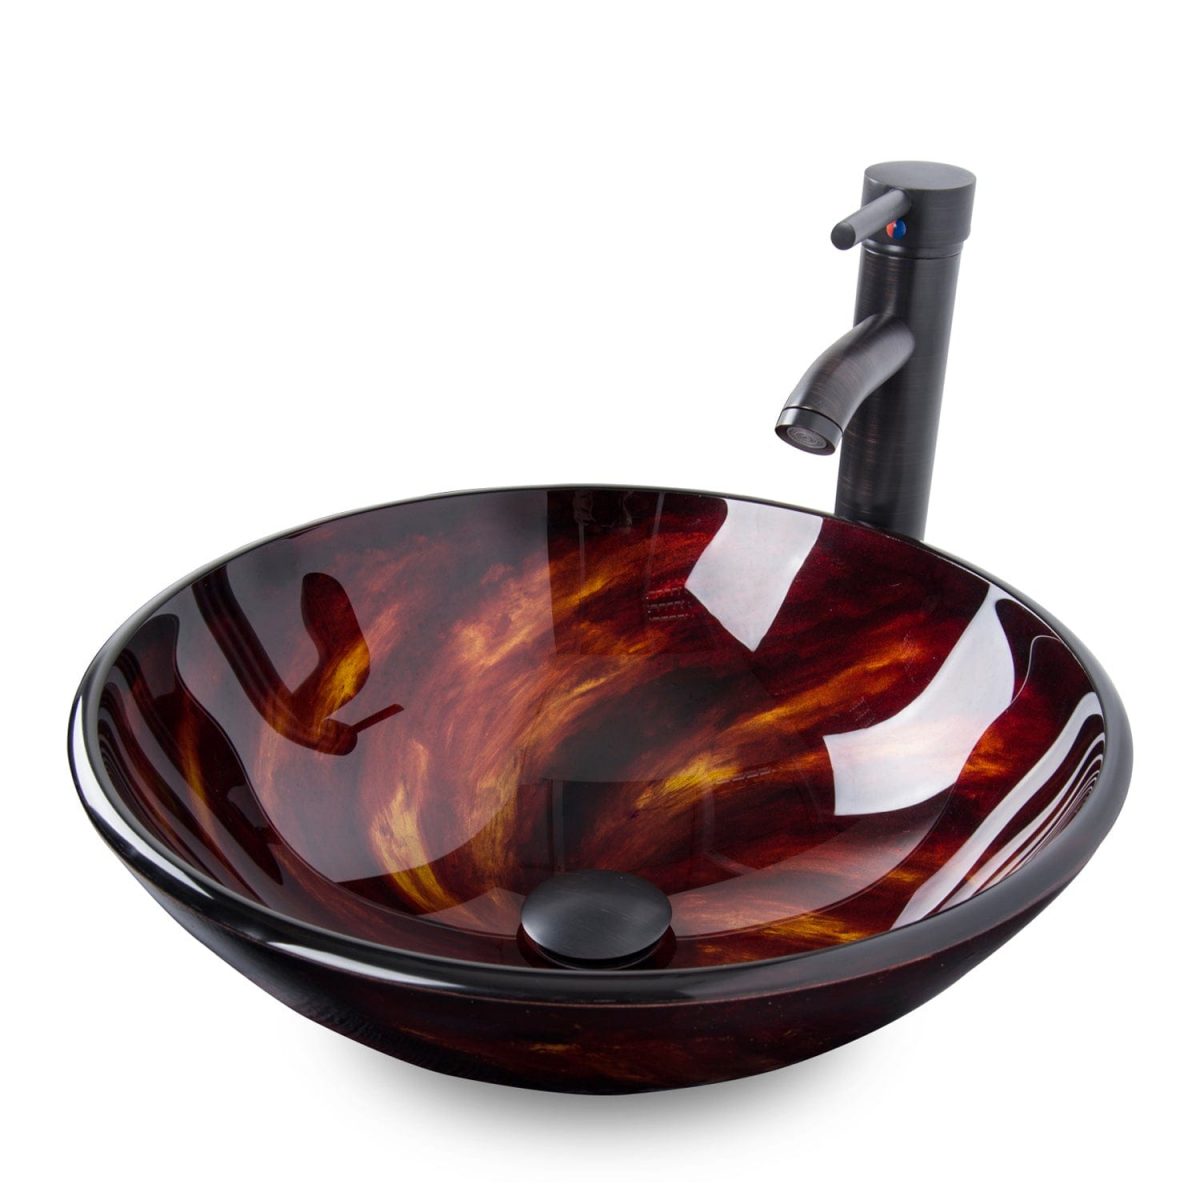 Elecwish Flame Red Round Sink